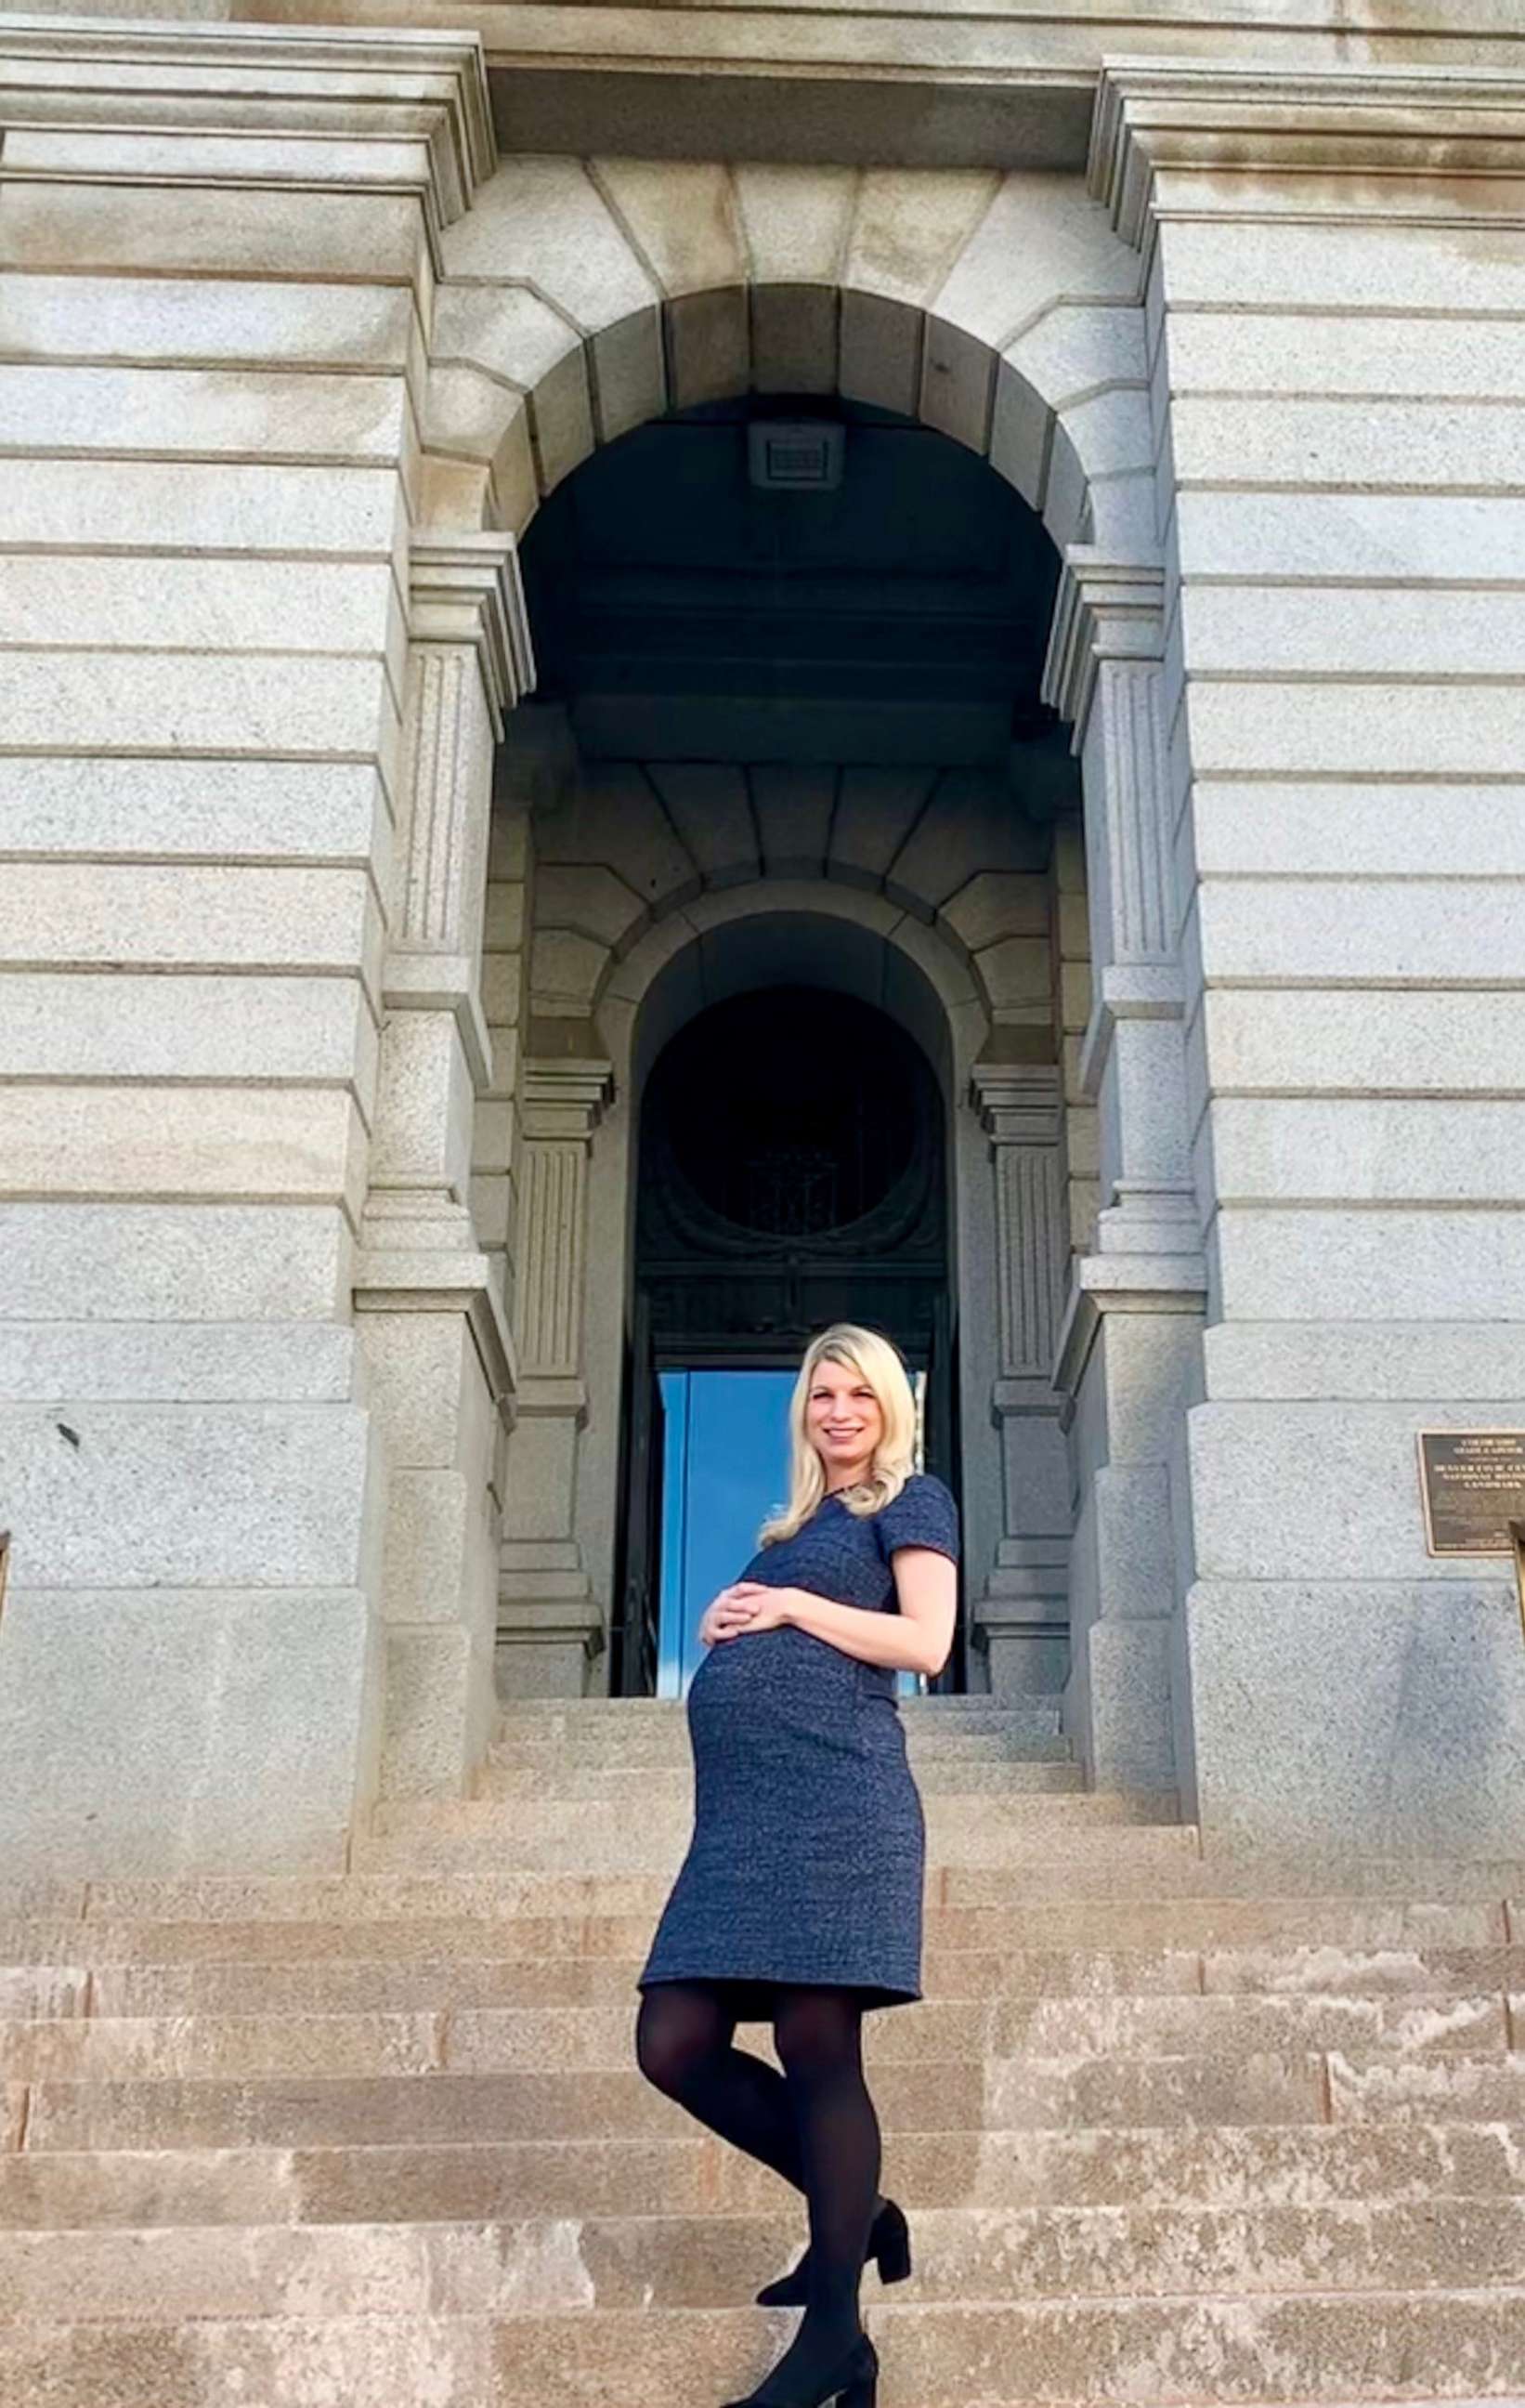 PHOTO: Colorado State Sen. Brittany Pettersen poses in front of the state capitol building in Denver during her pregnancy.